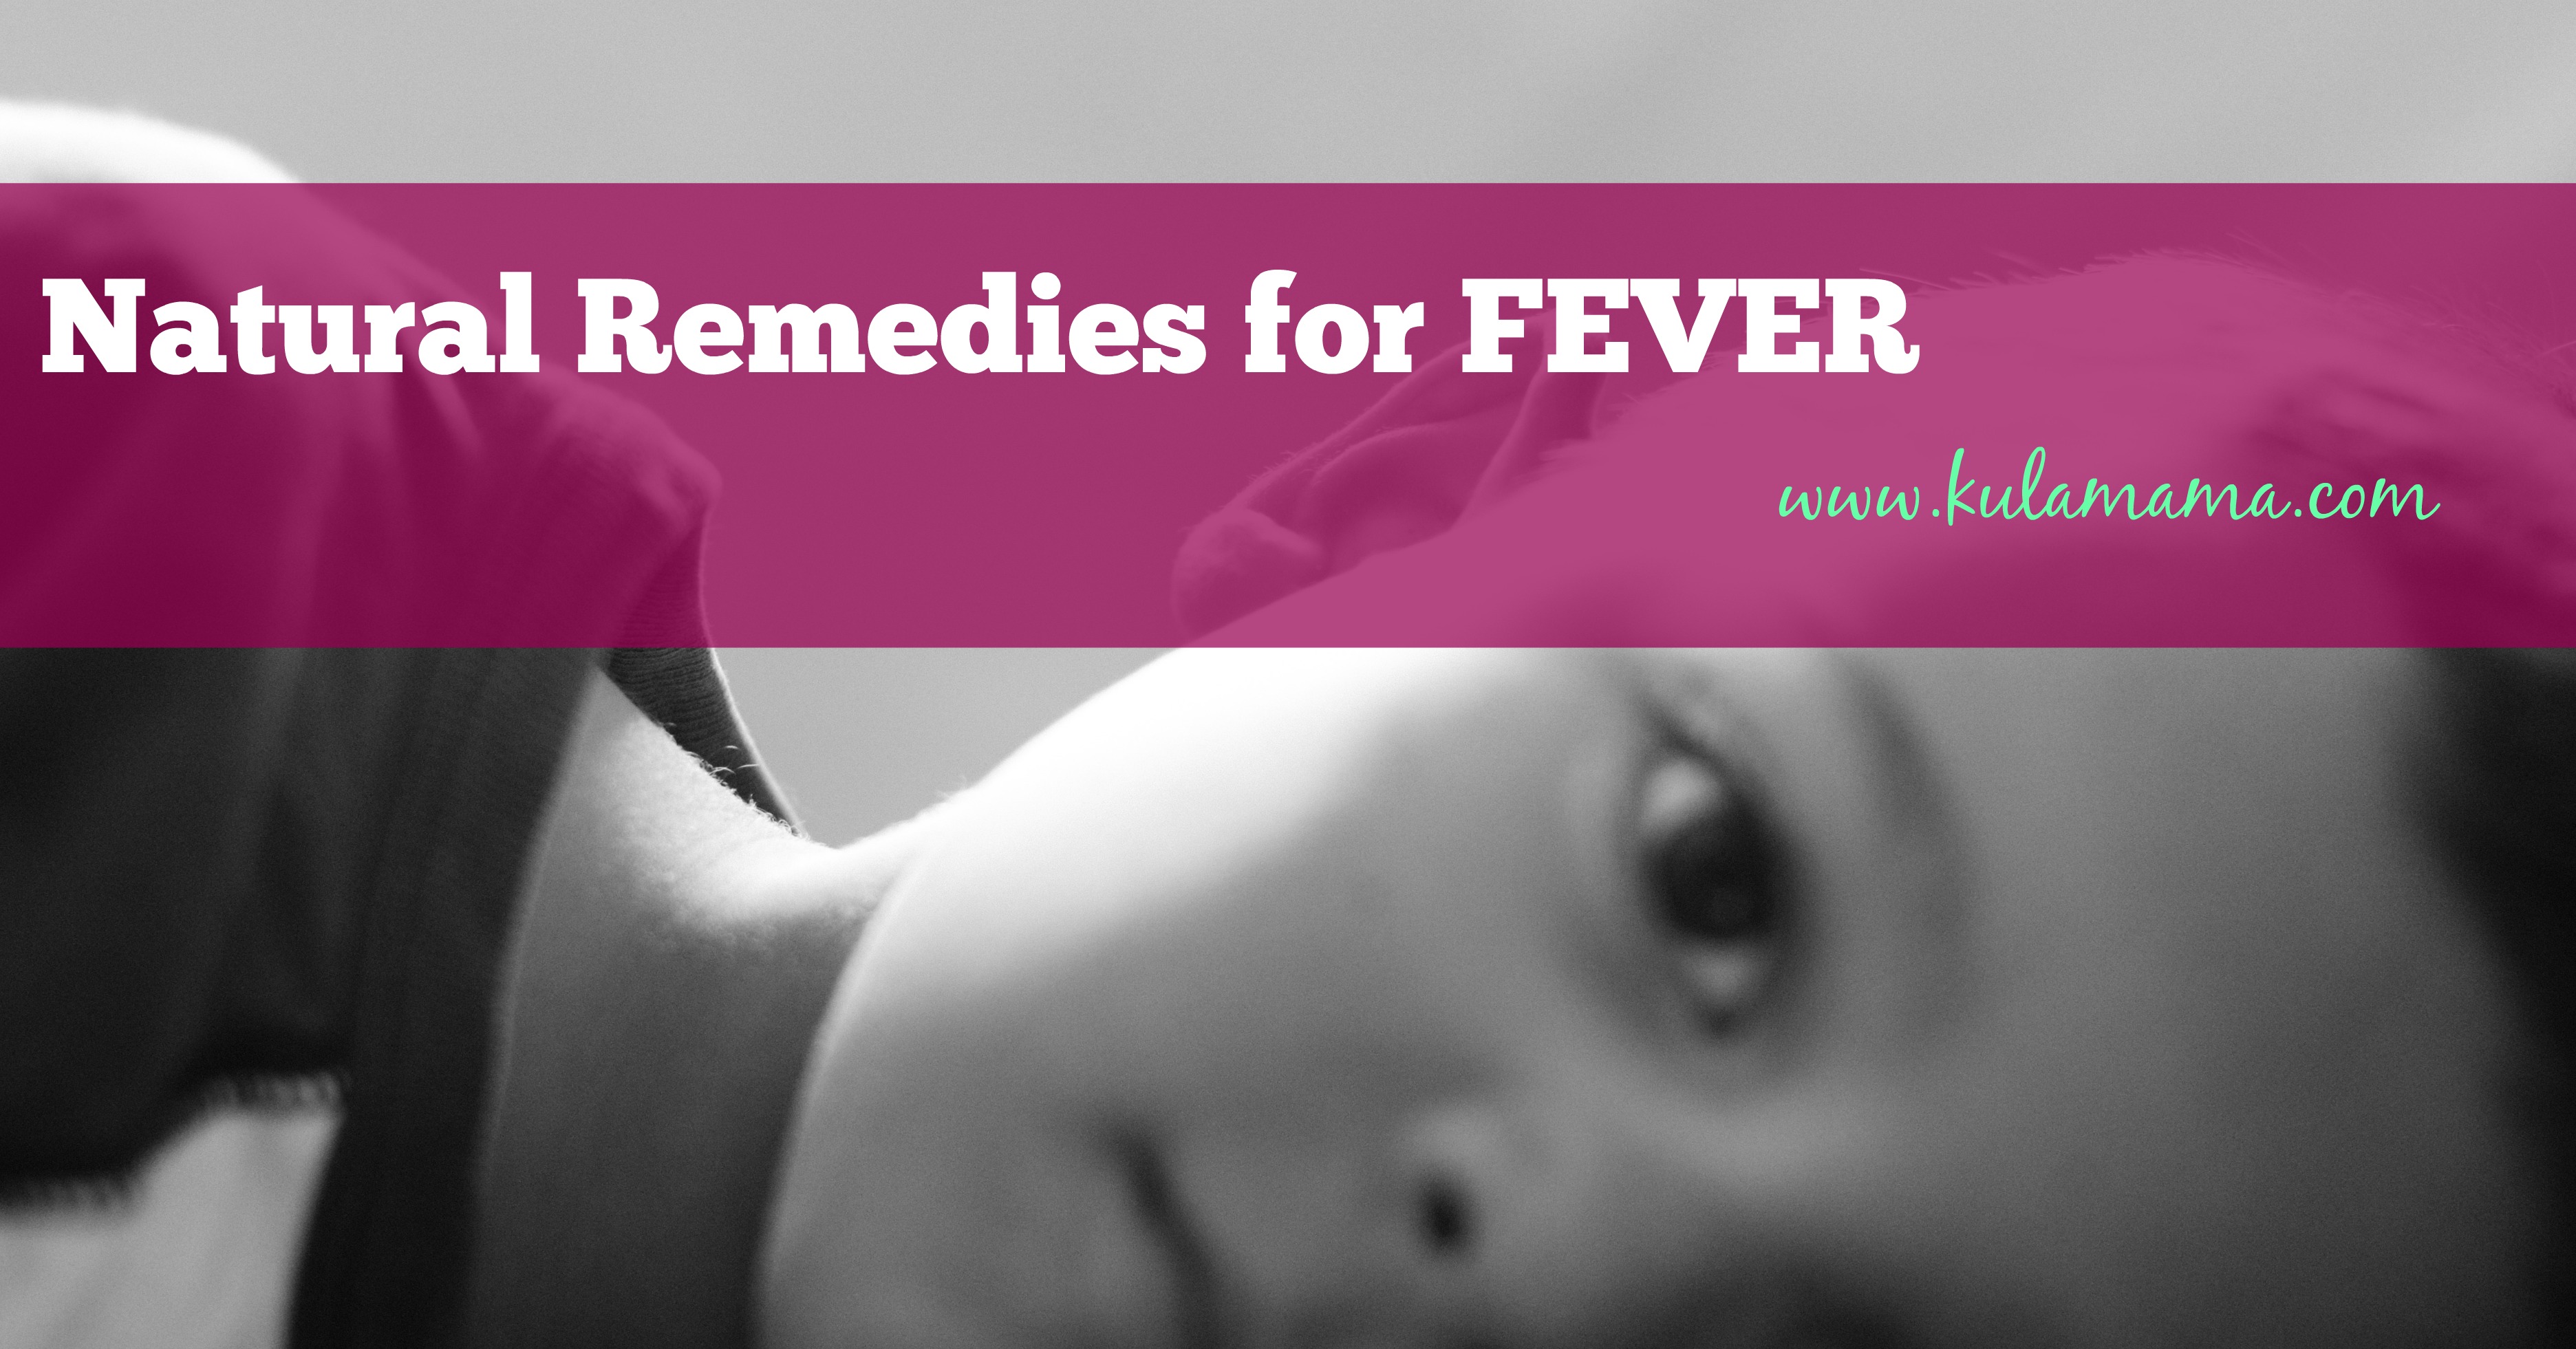 Natural Remedies for Fever